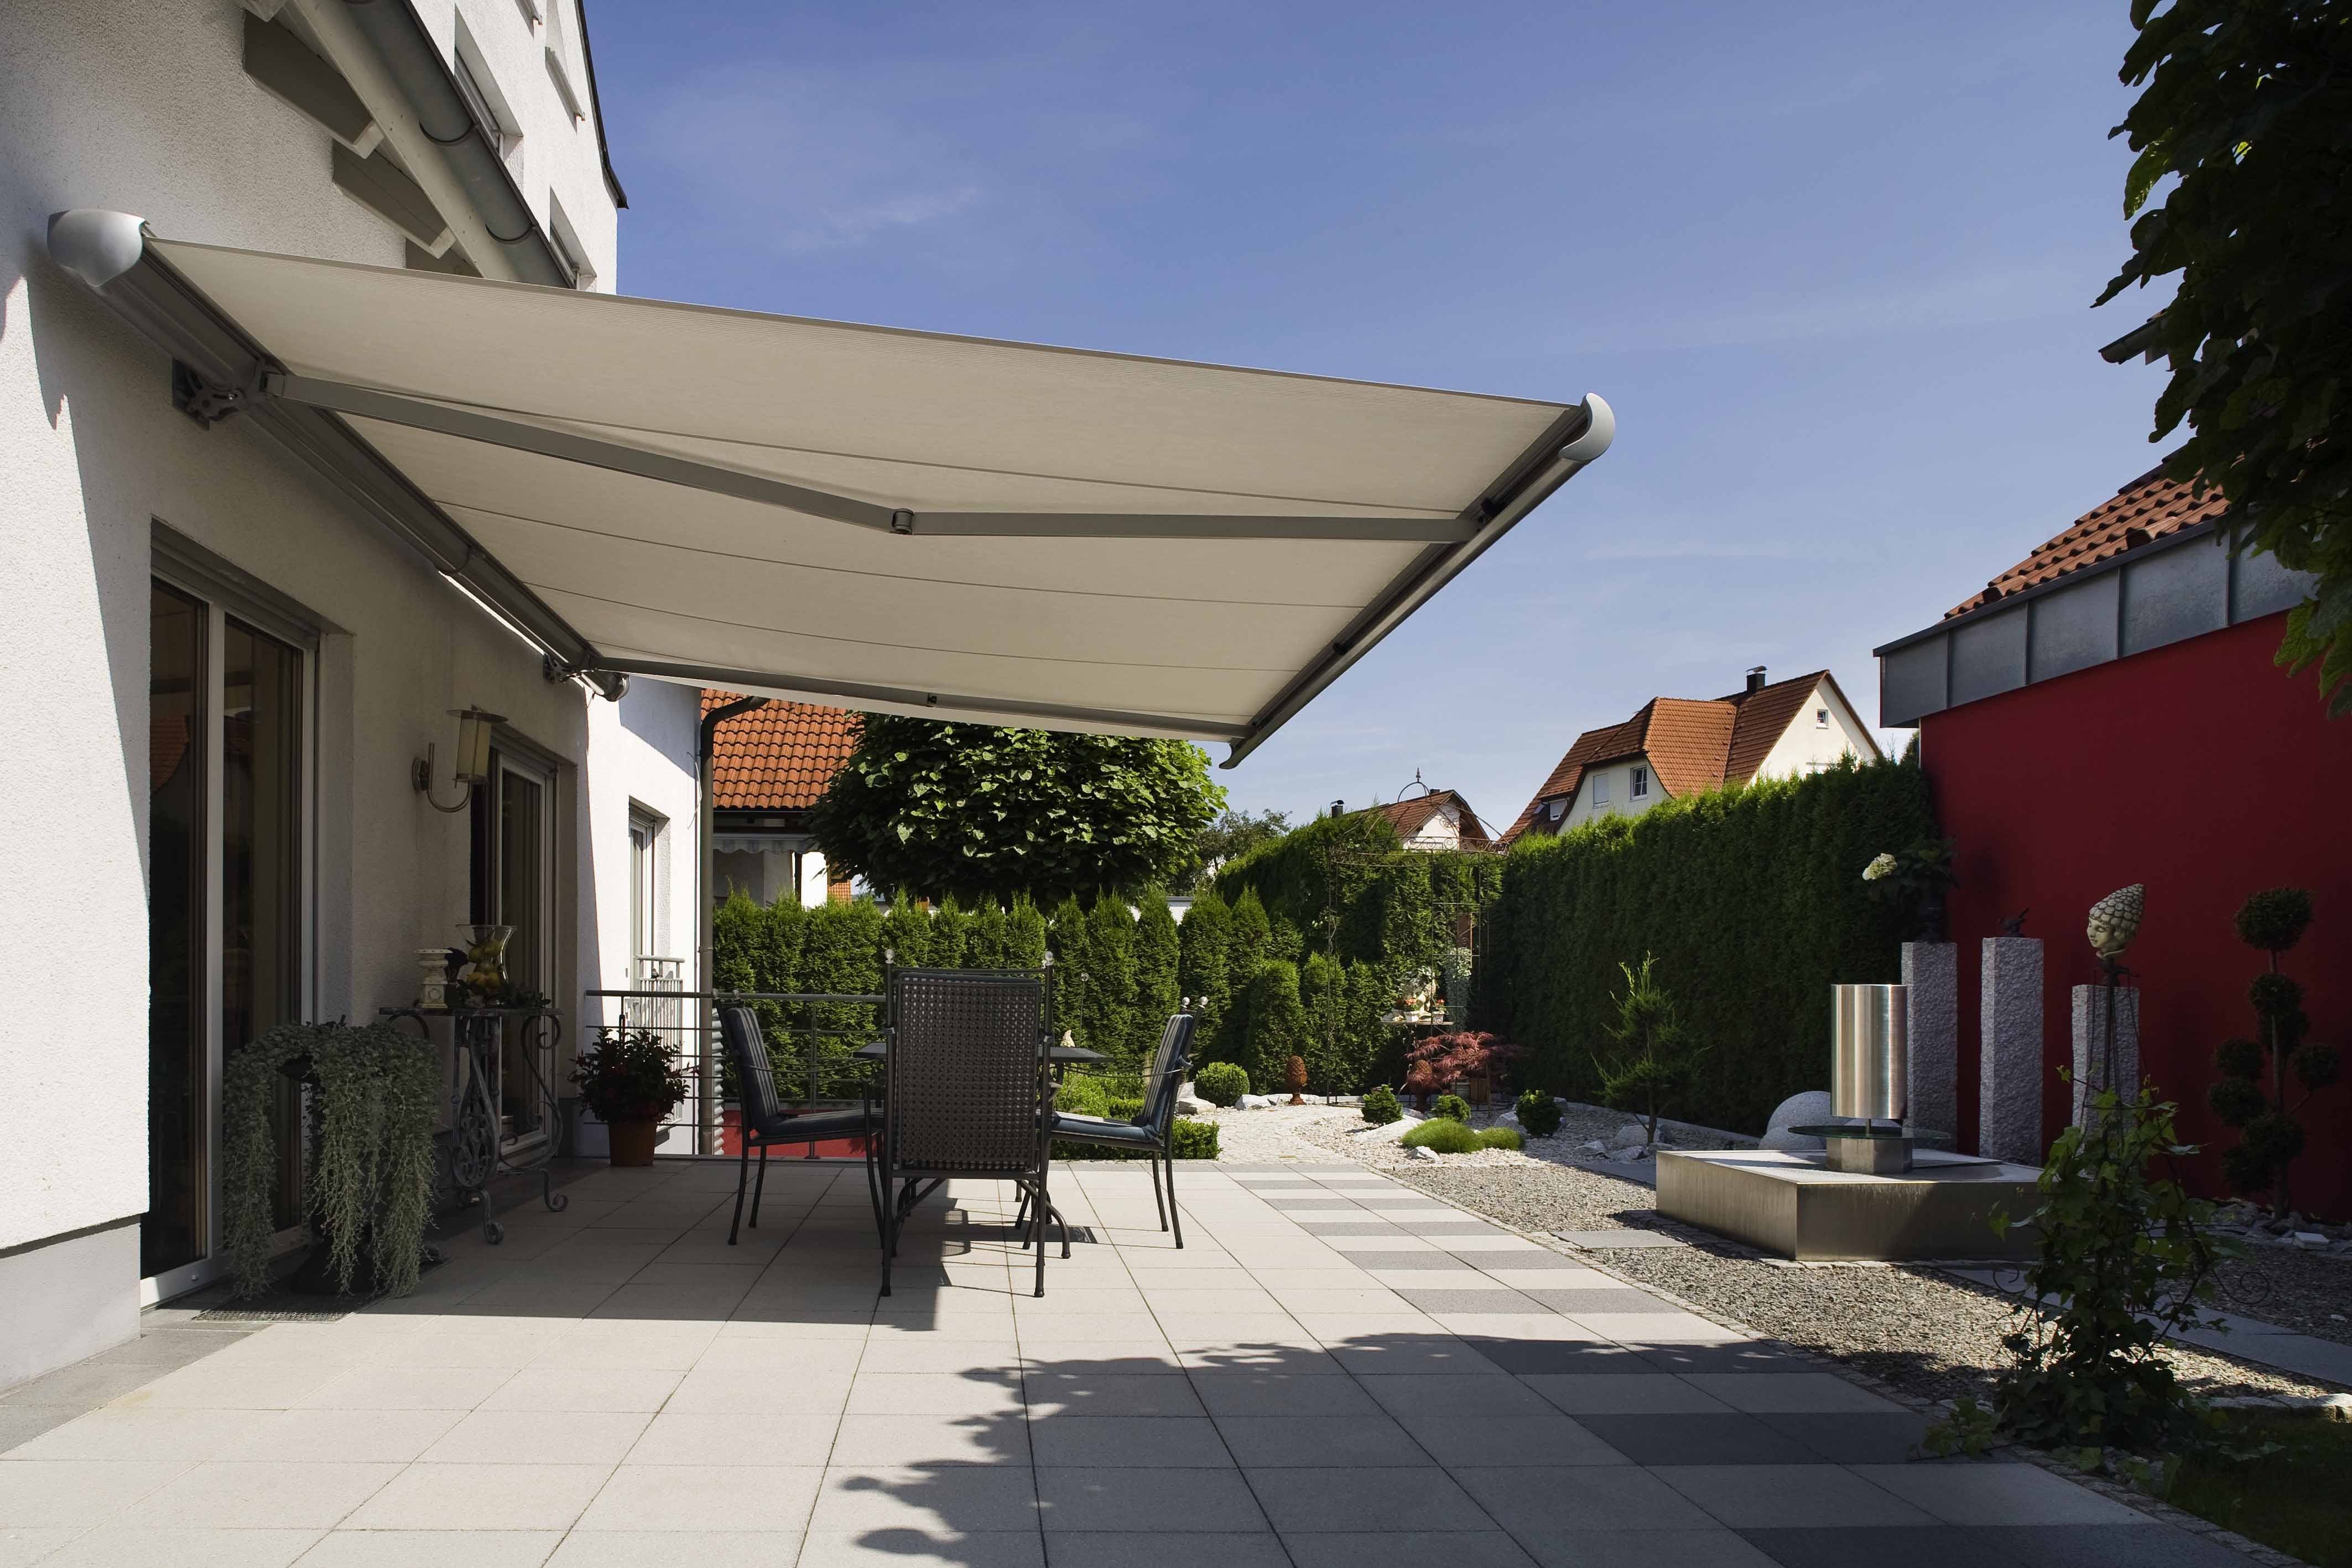 Folding Arm Awnings Adelaide Manual Or Automatic Burns For Blinds